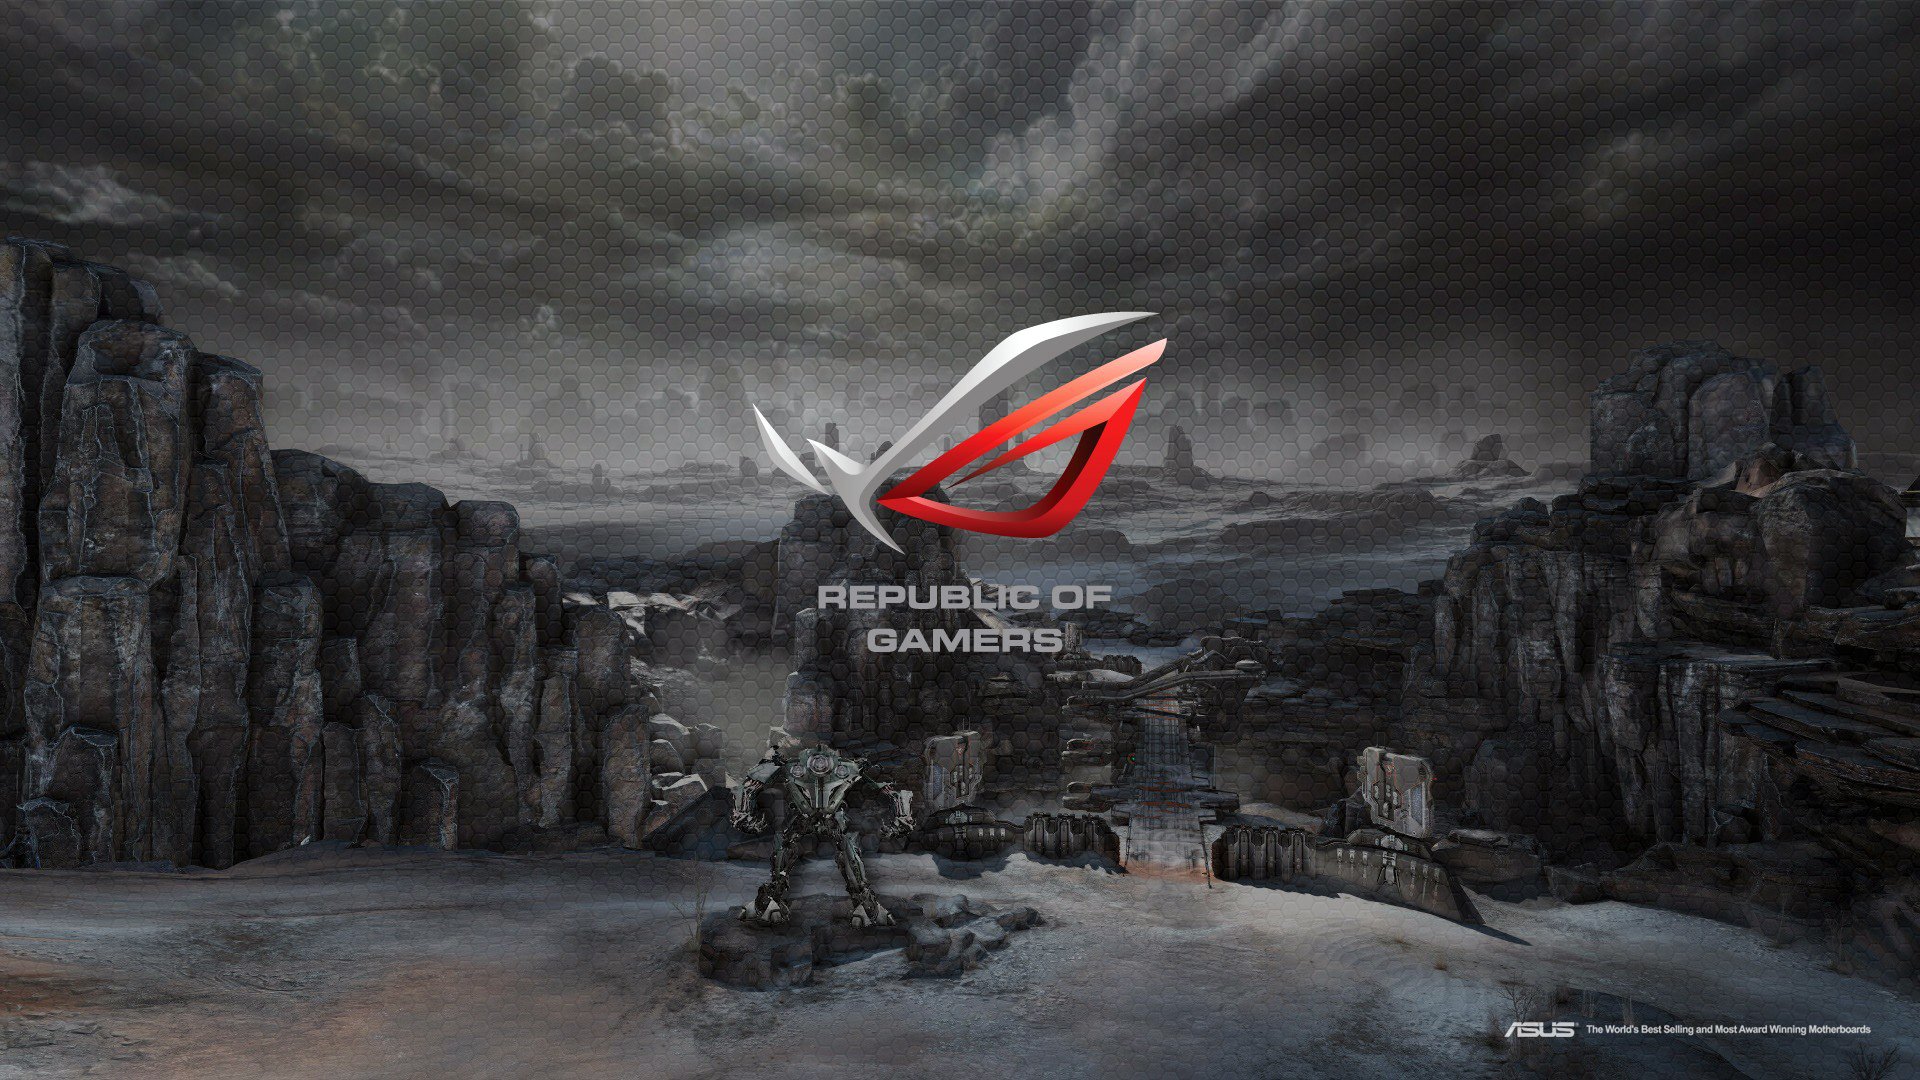 asus rog, republic of gamers, technology, rage (video game)